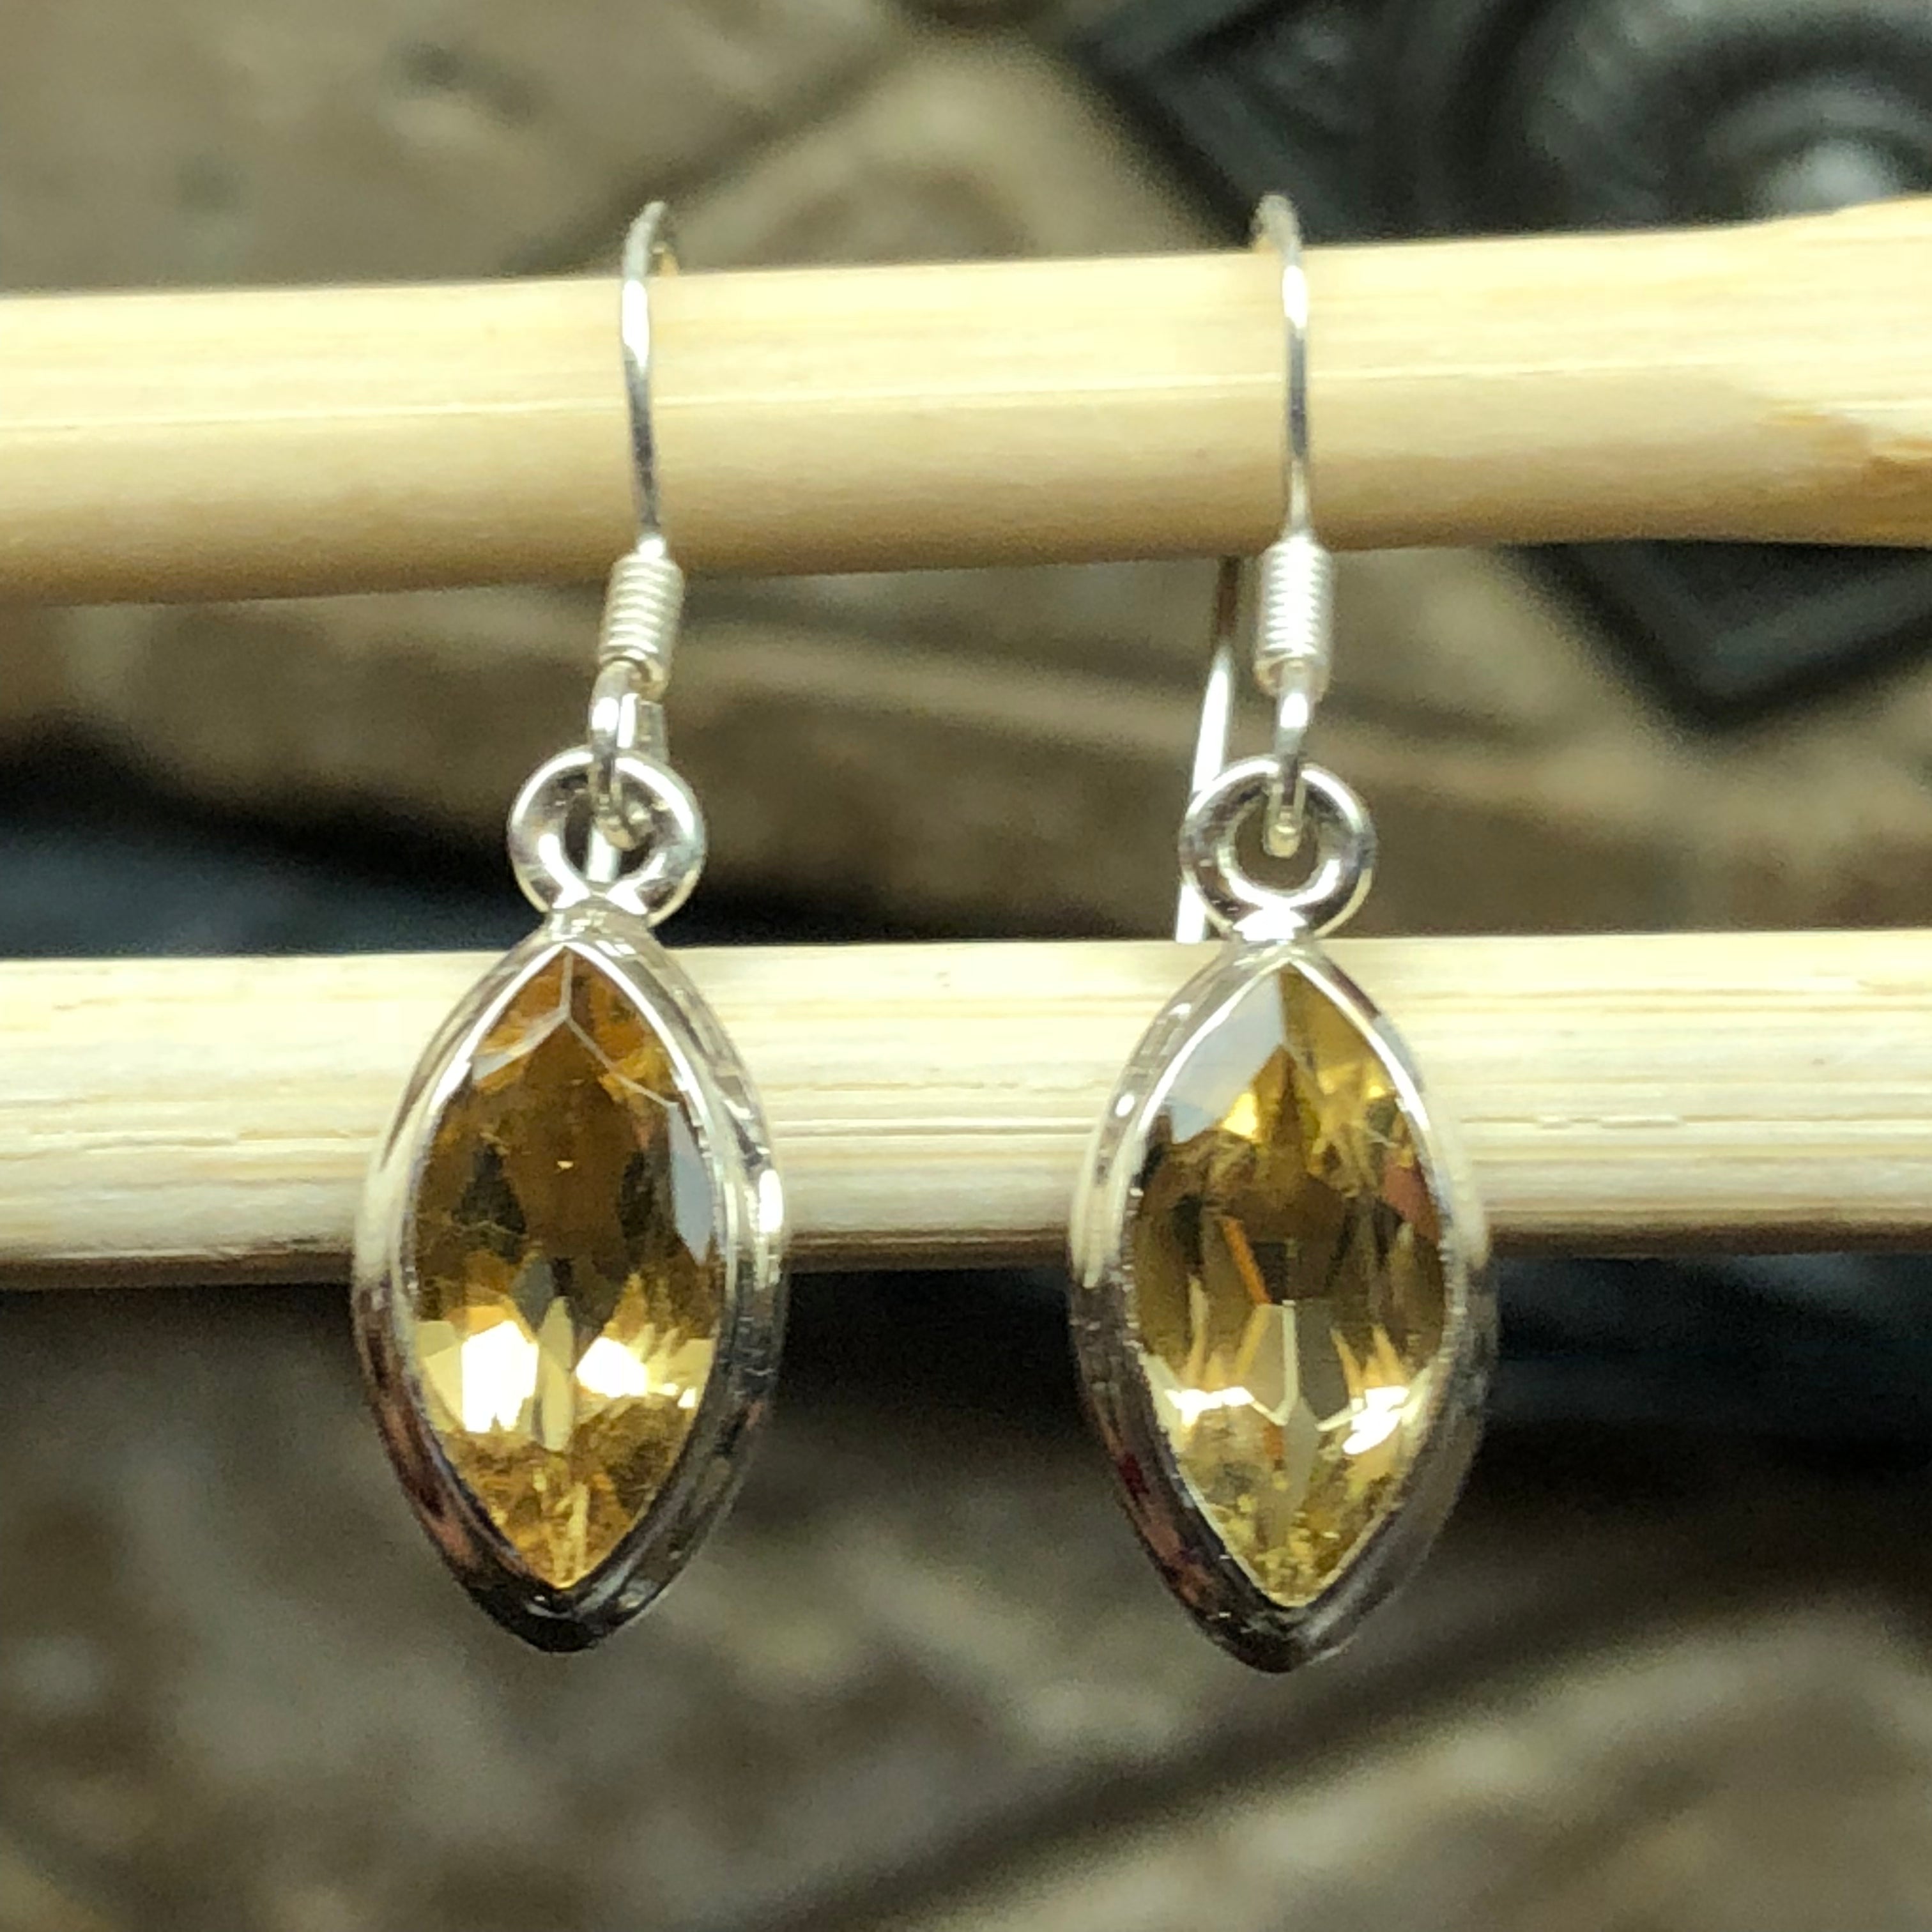 Natural 2ct Golden Citrine 925 Solid Sterling Silver Earrings 22mm - Natural Rocks by Kala